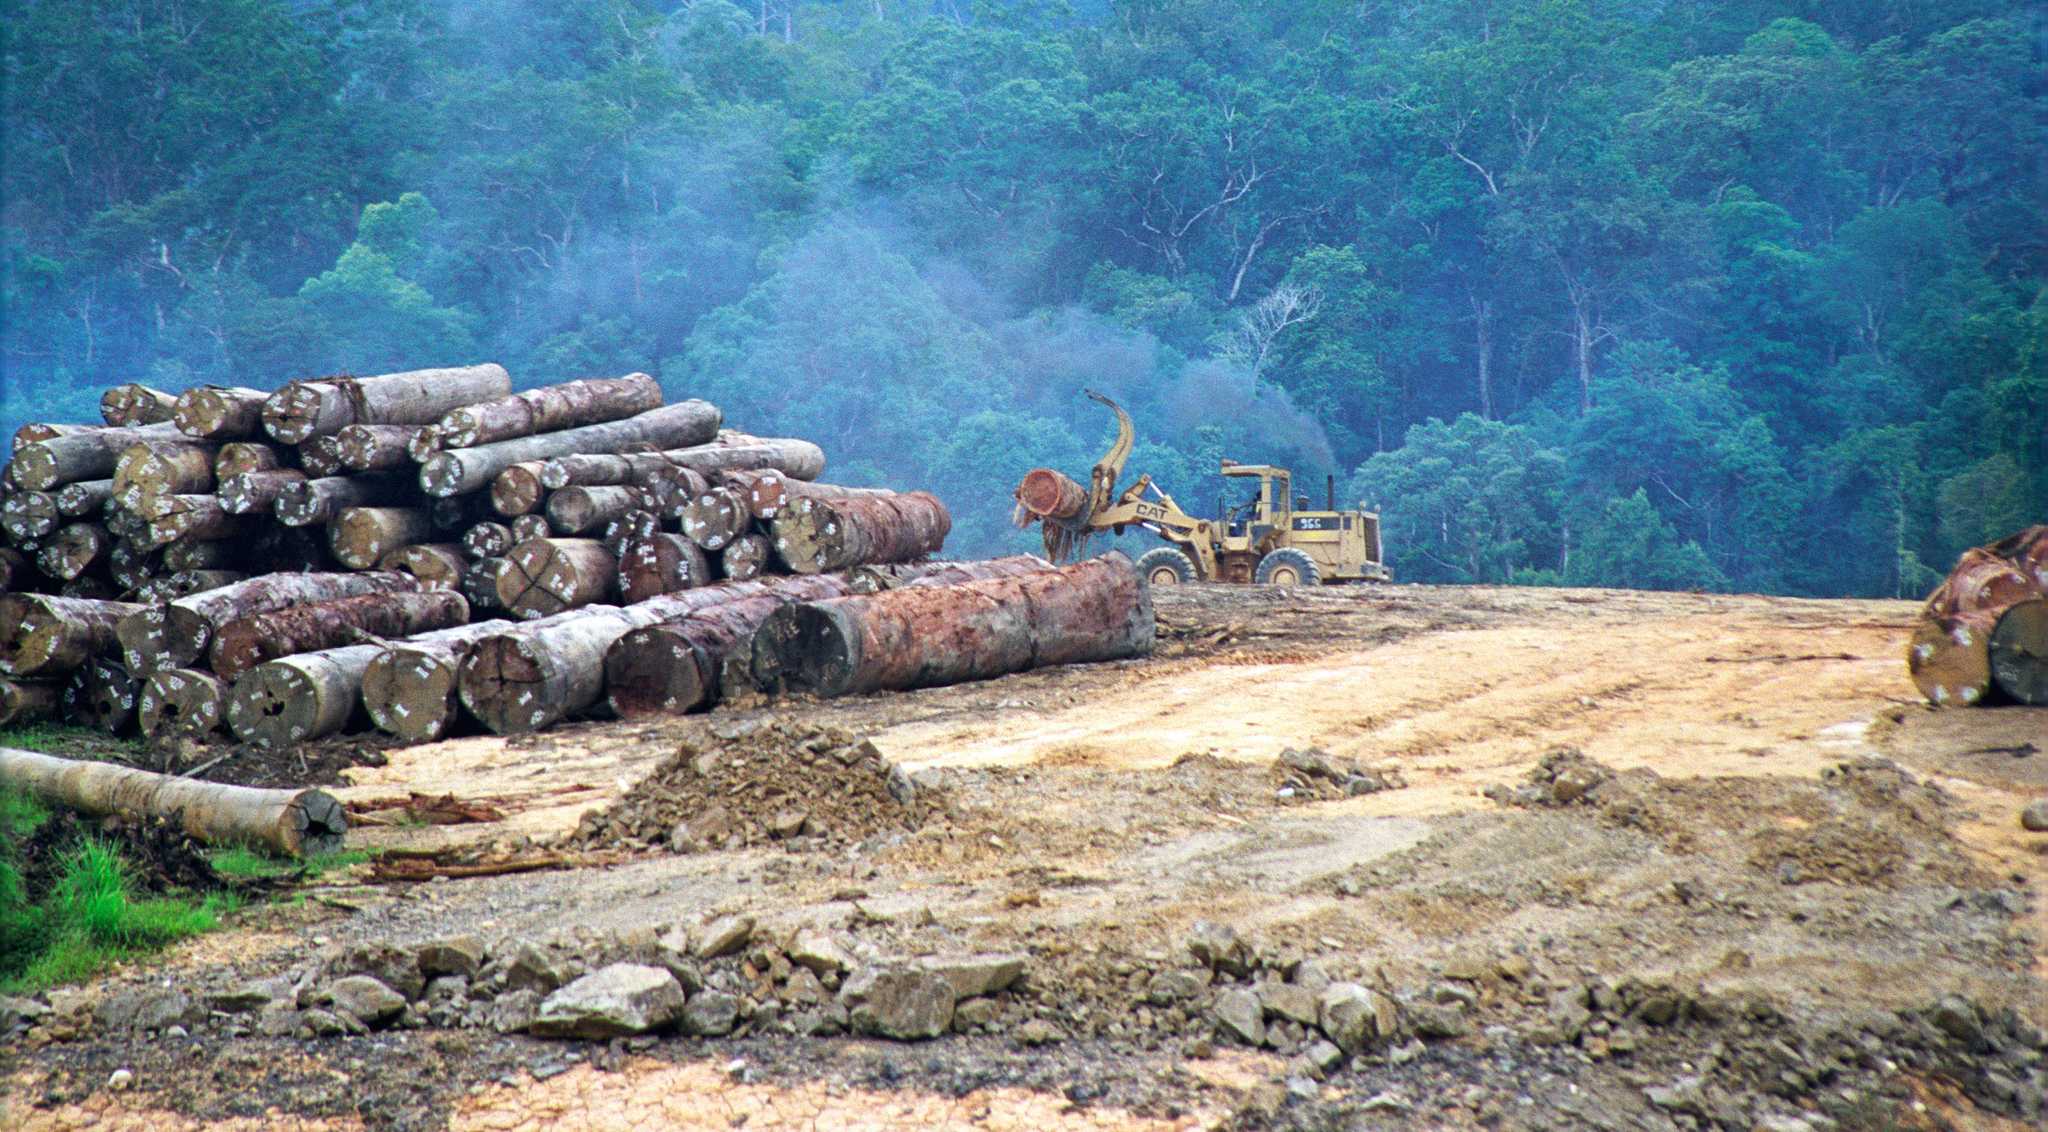 A barge carries logs down a river in North Kalimantan, in 2021.